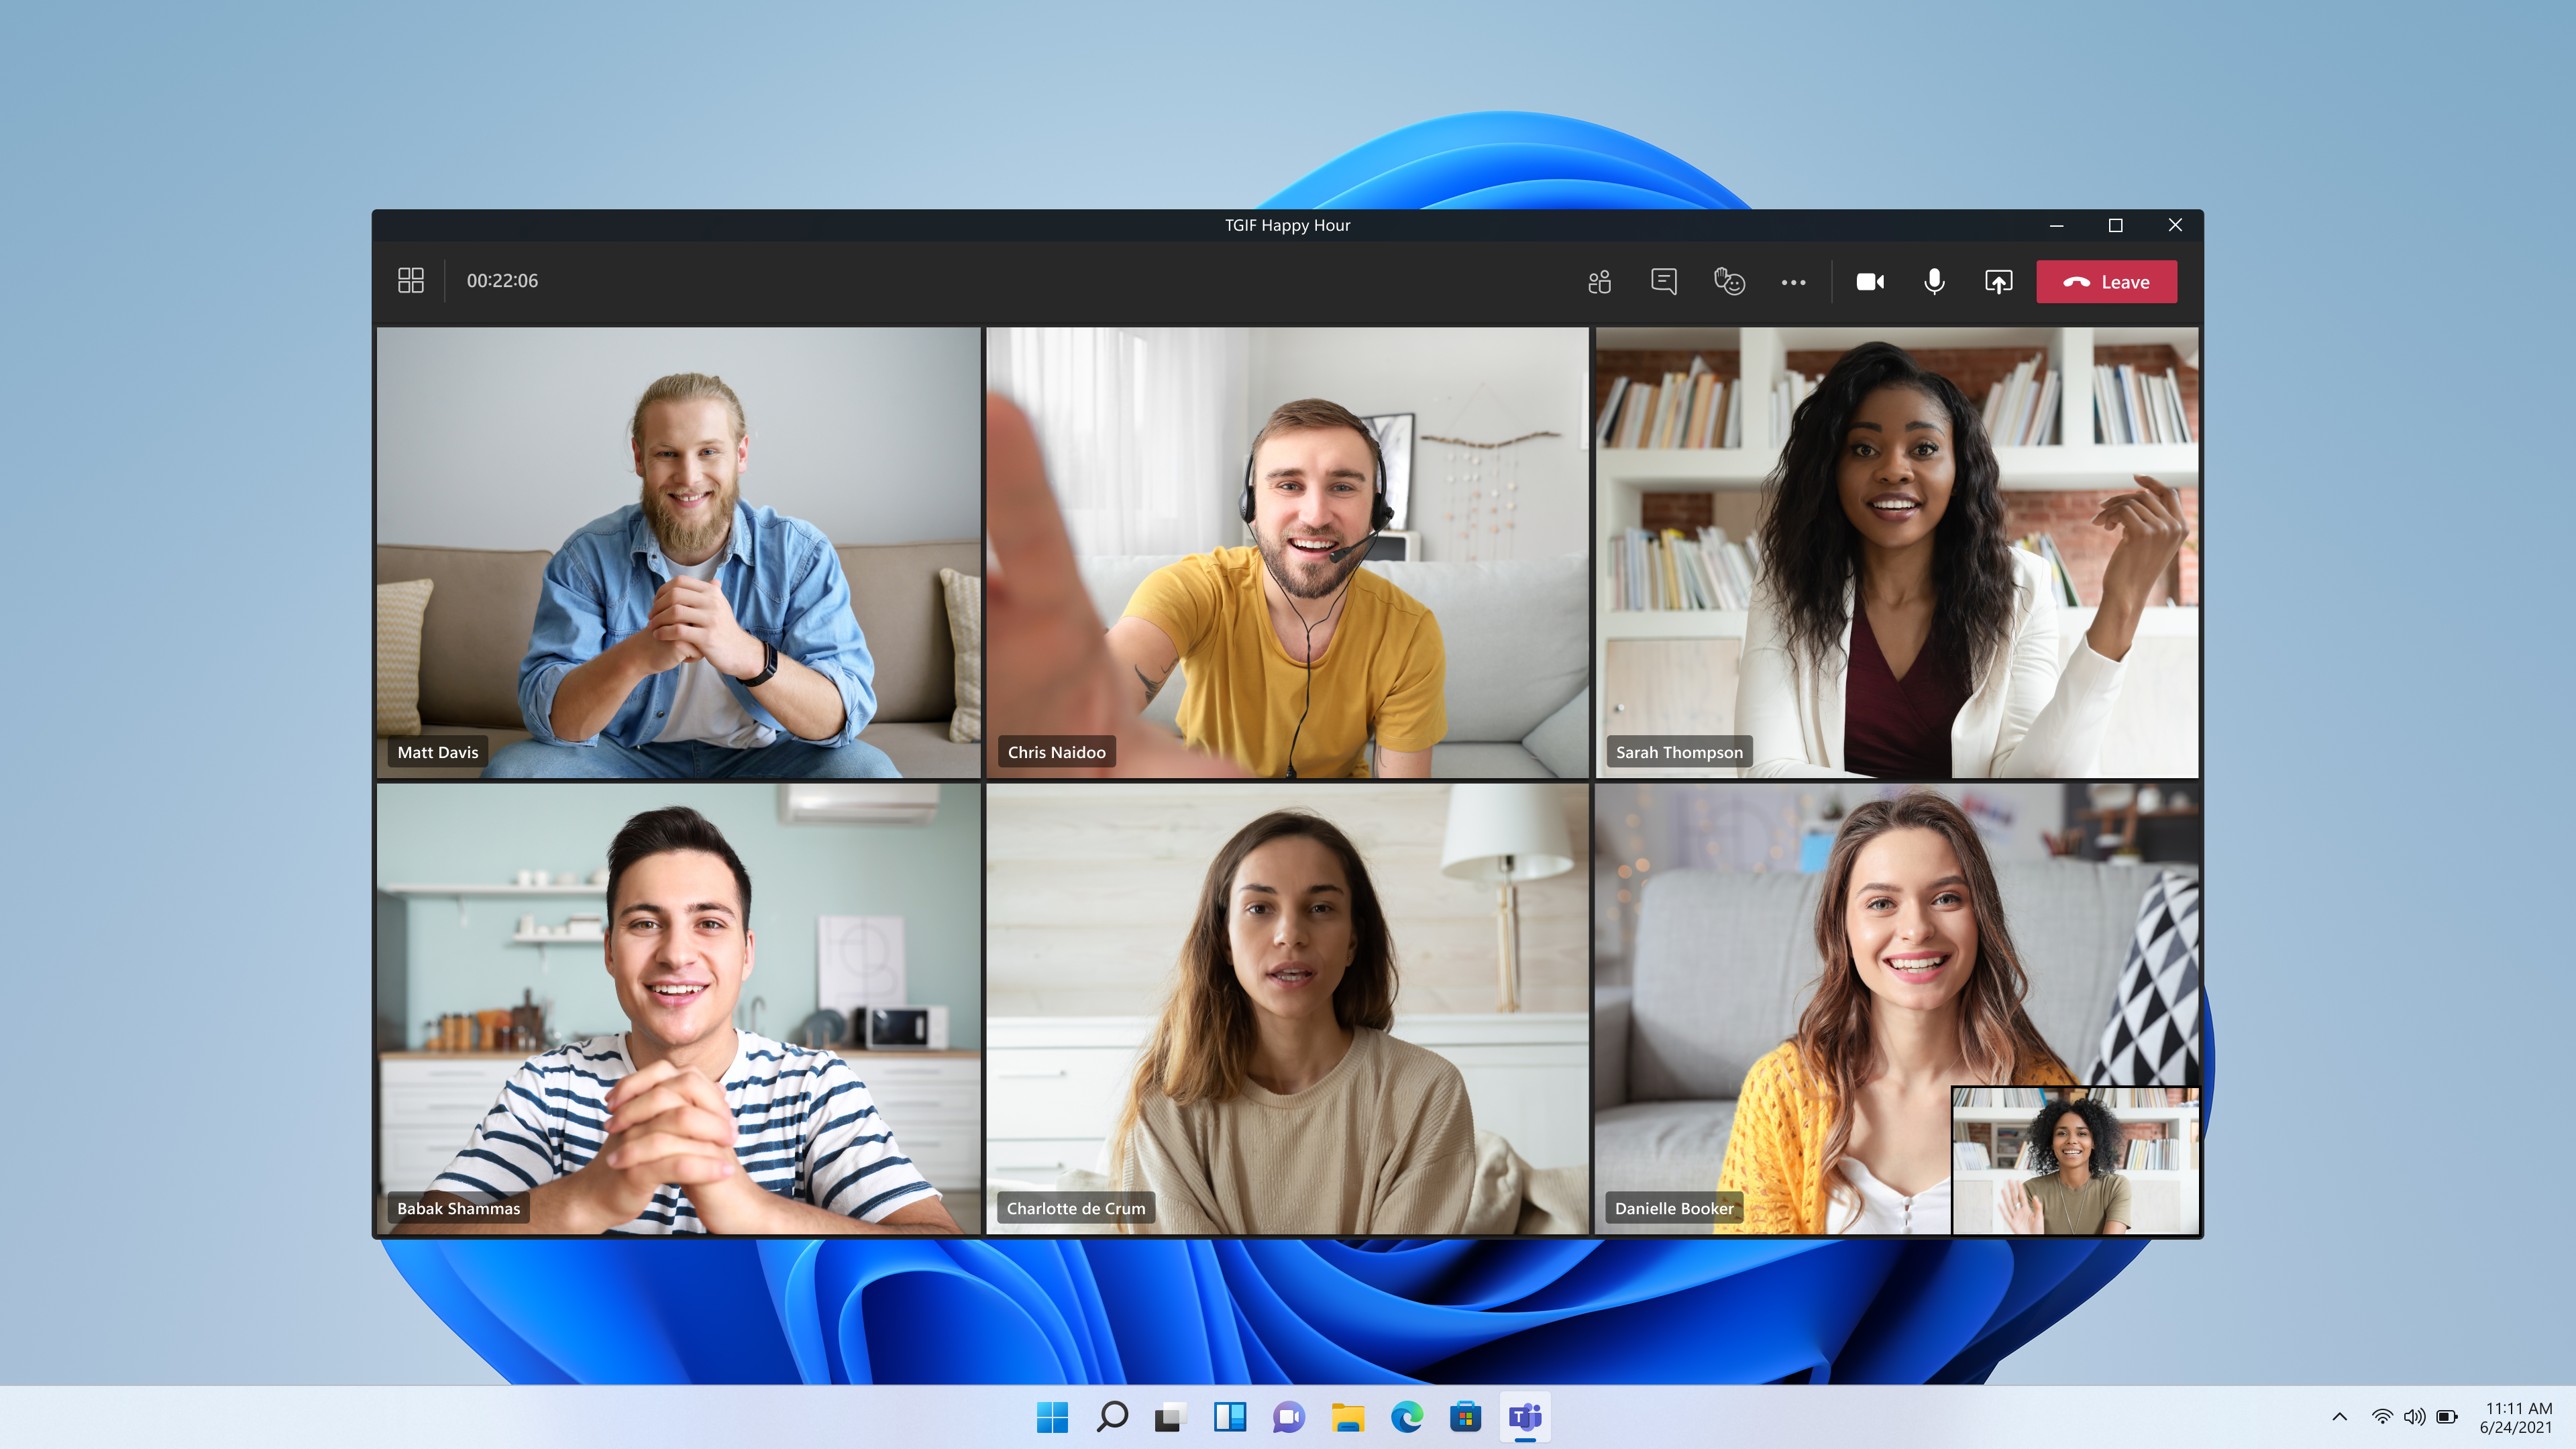 The design of the experience features rounded corners, effects, and visuals coherent with the rest of the Windows 11 experience.